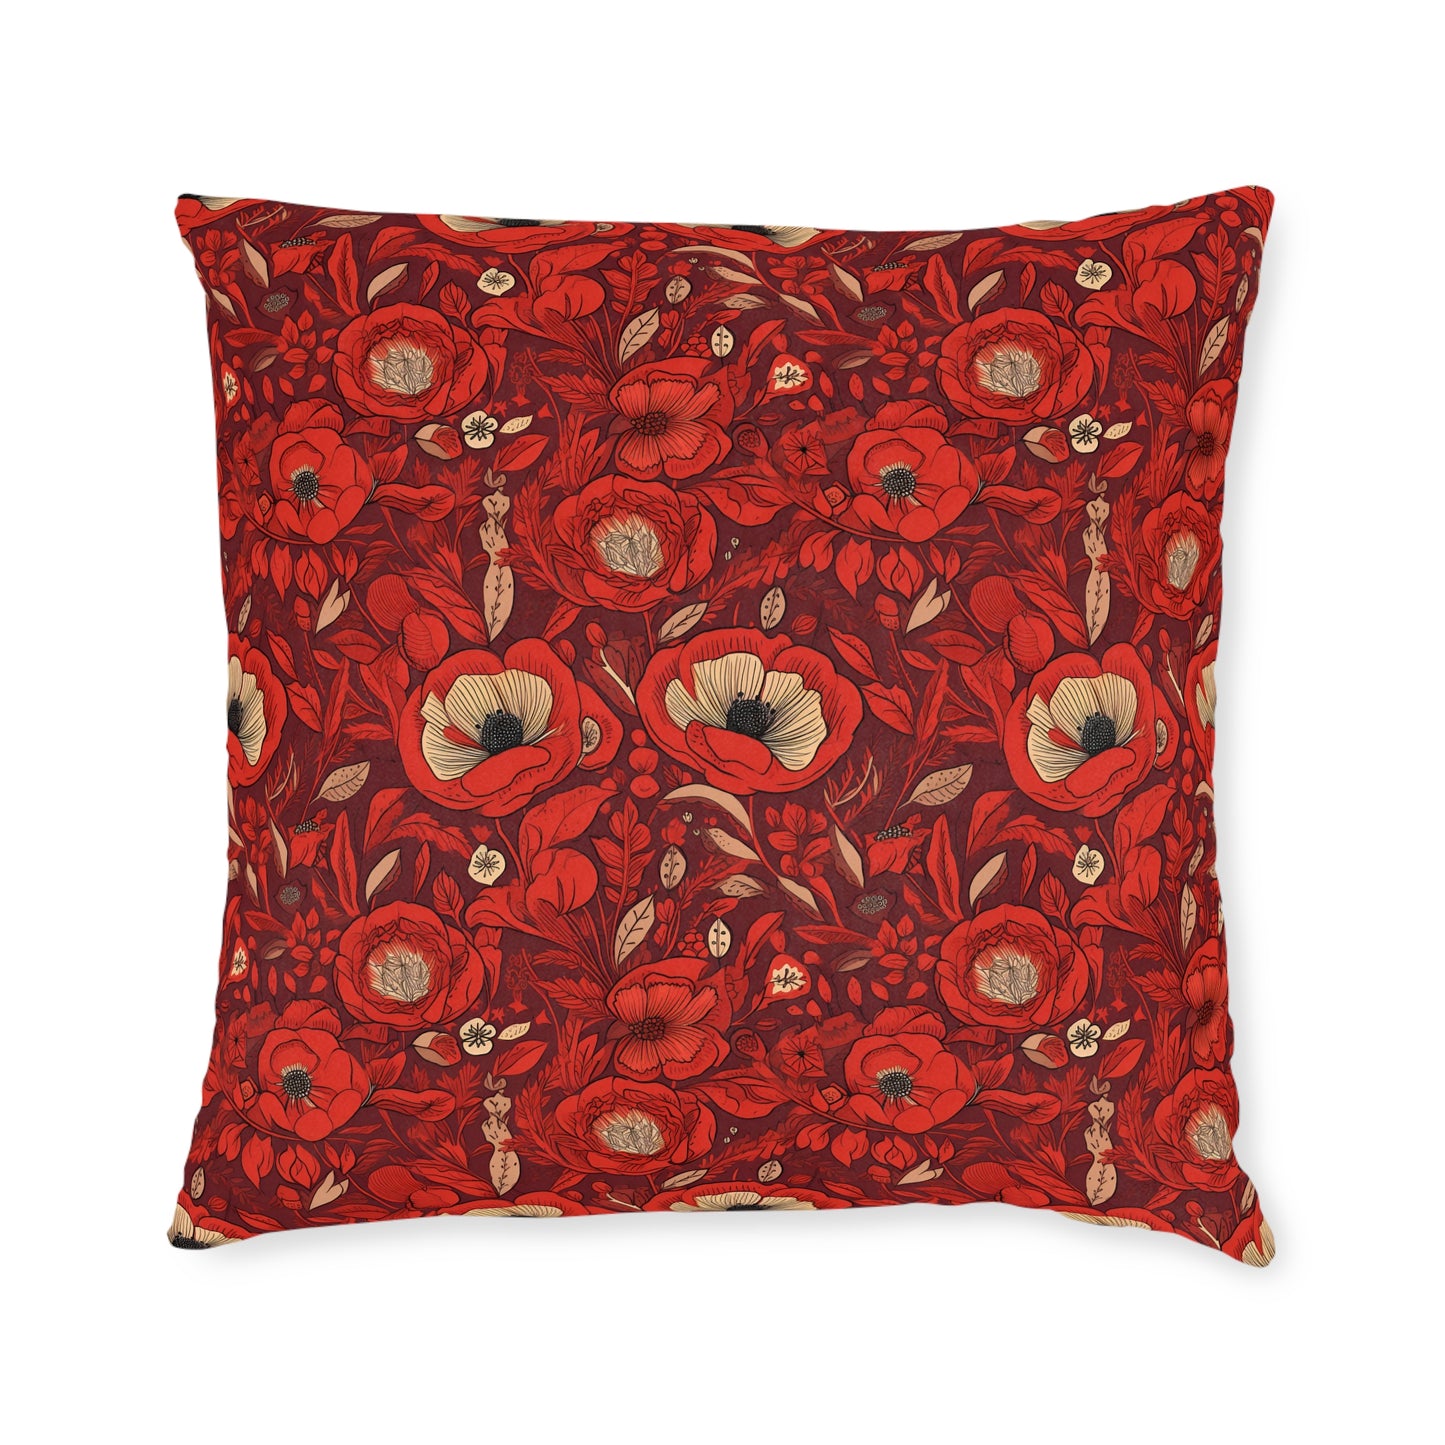 Radiant Spring Blossoms - Vibrant Red Floral Design Sofa and Chair Cushion